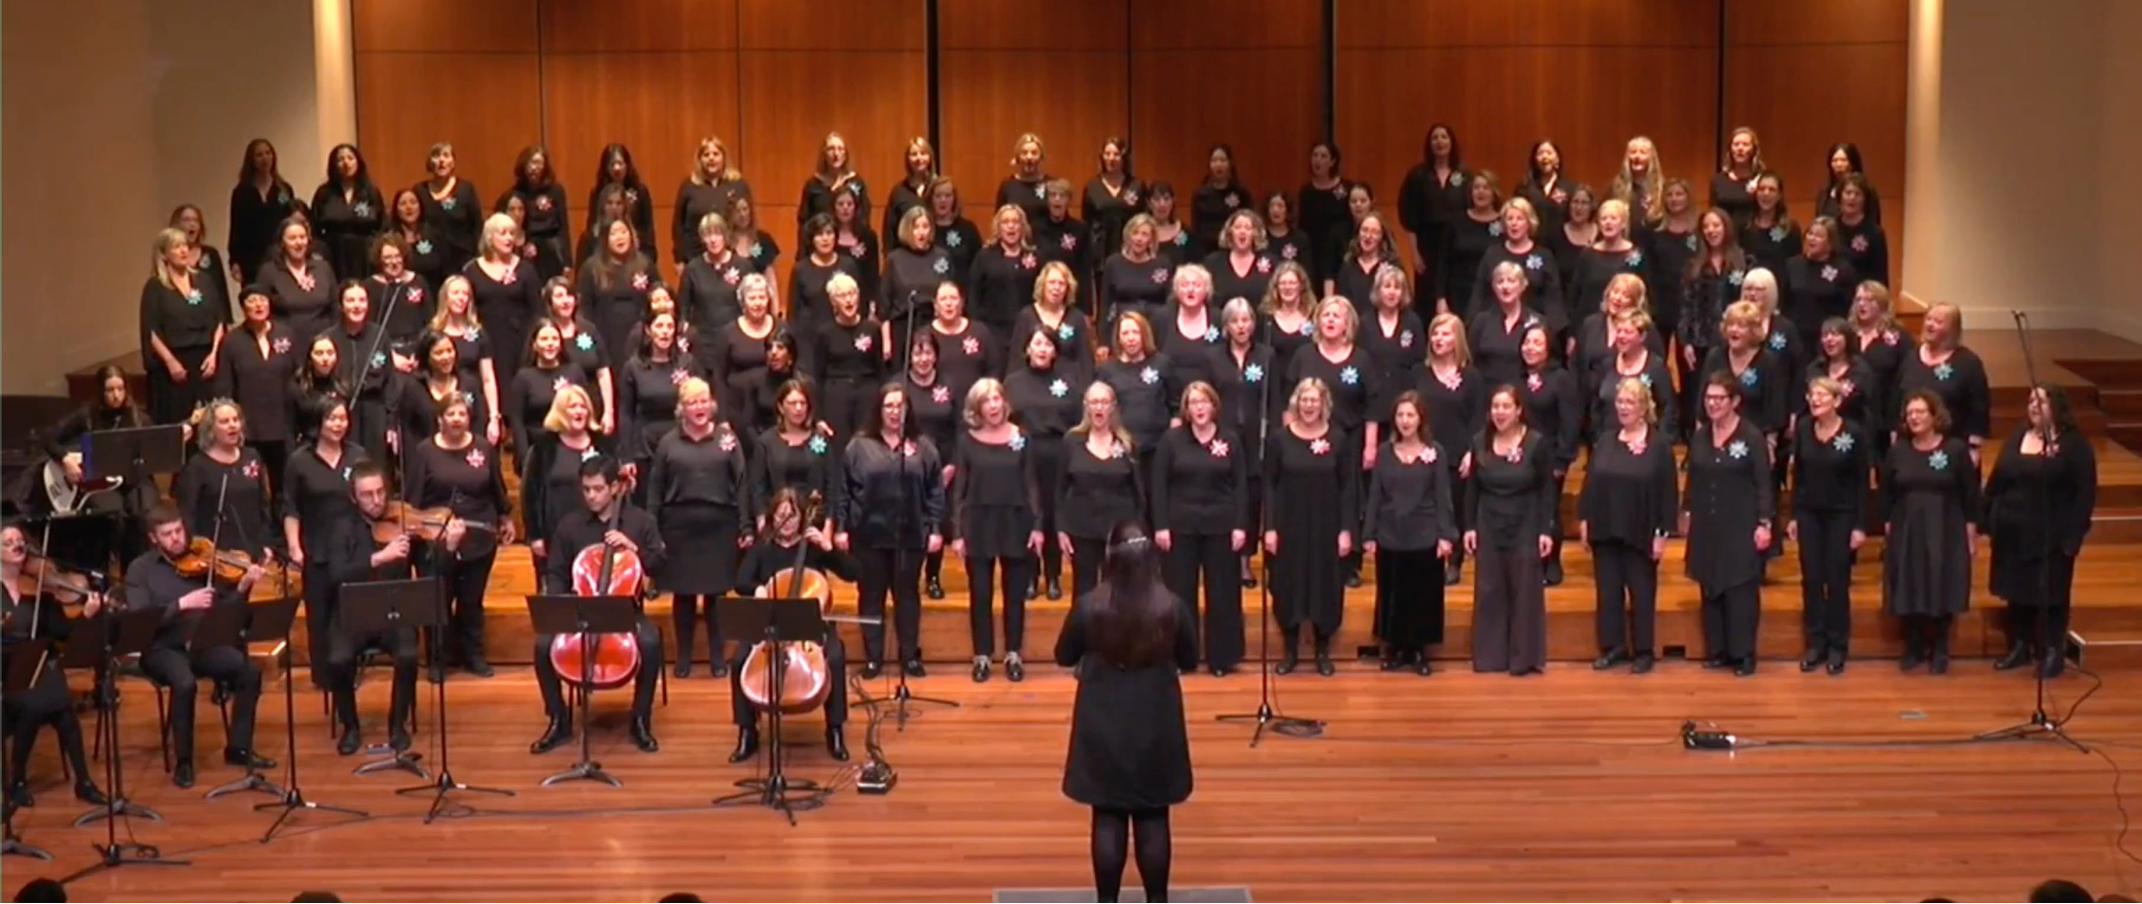 THE SPRING SING ANNUAL CONCERT - MELBOURNE CHOIRS